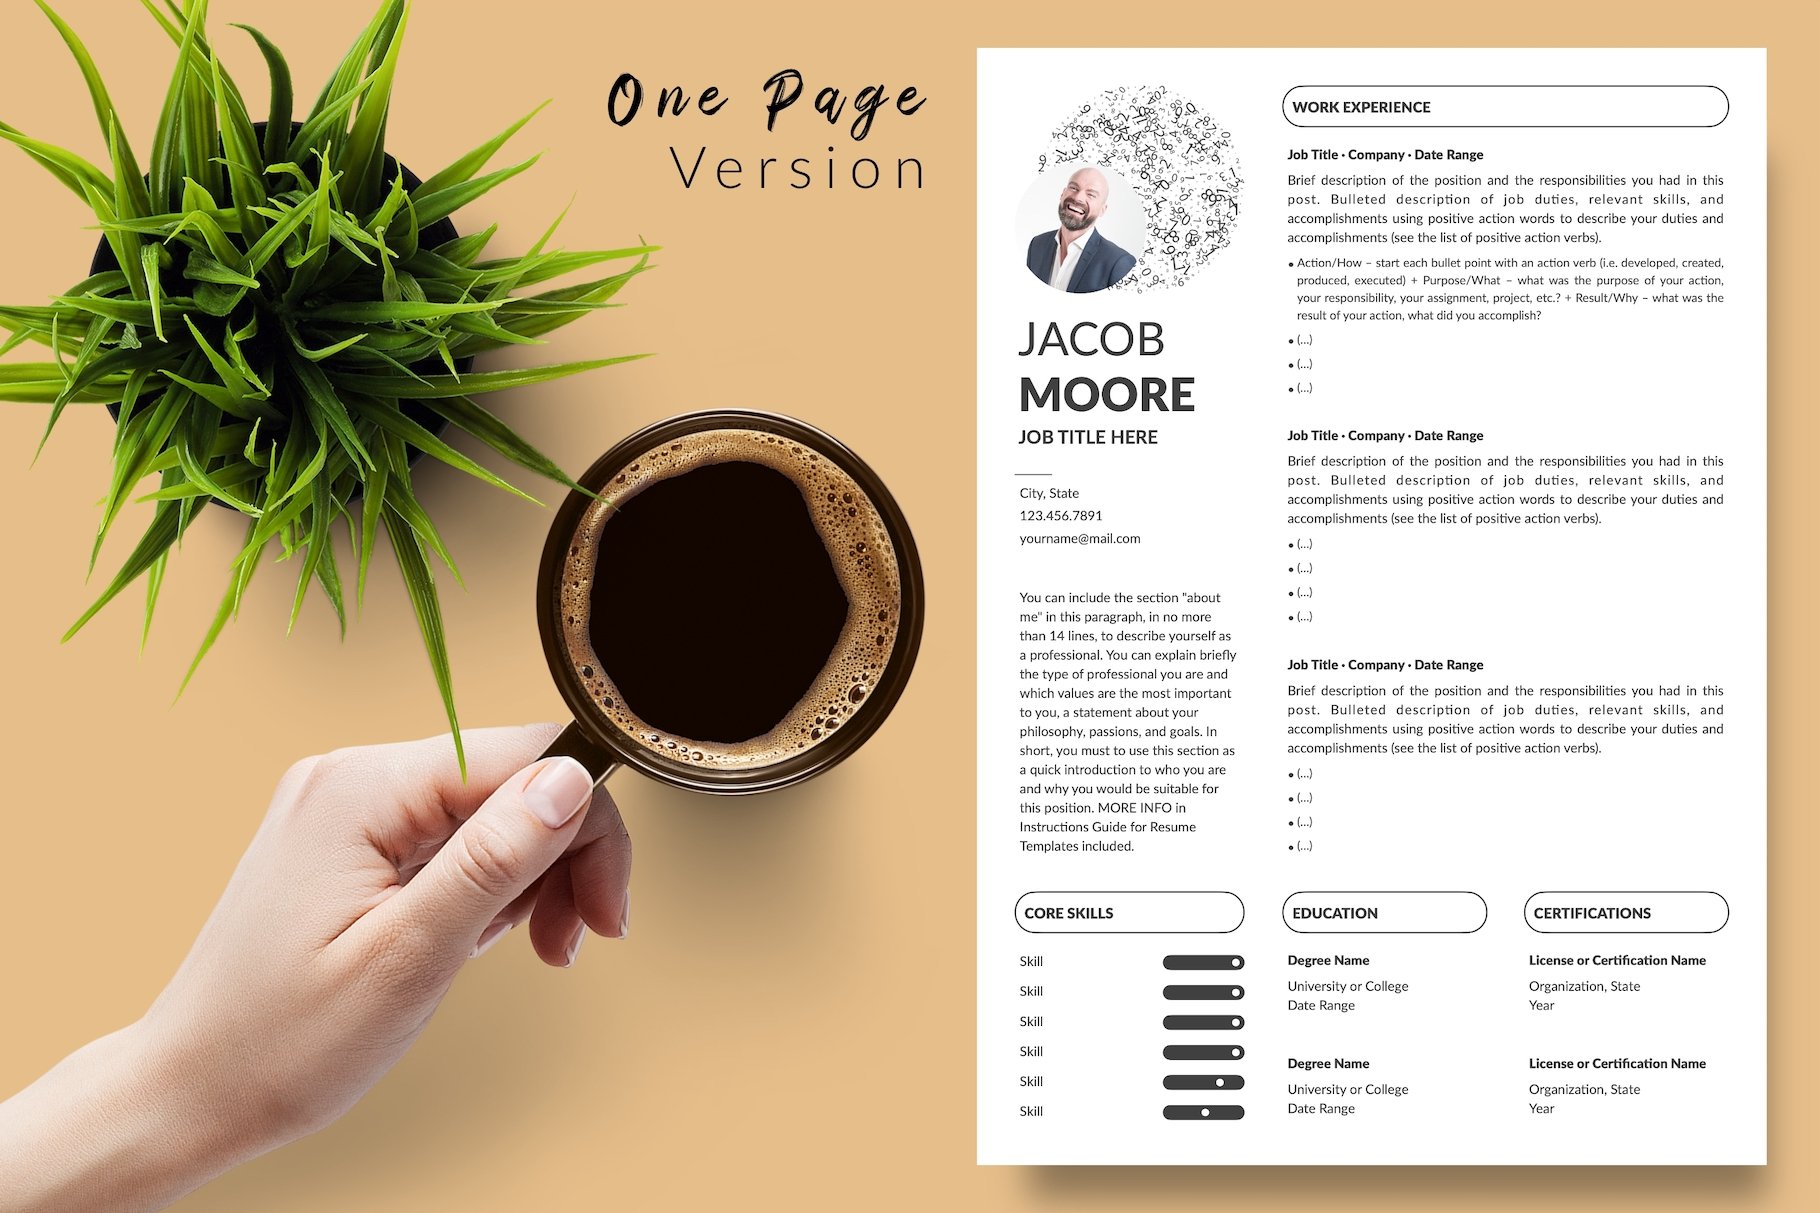 resume cv template jacob moore 282in1 special edition29 for creative market 02 one page version white edition 13